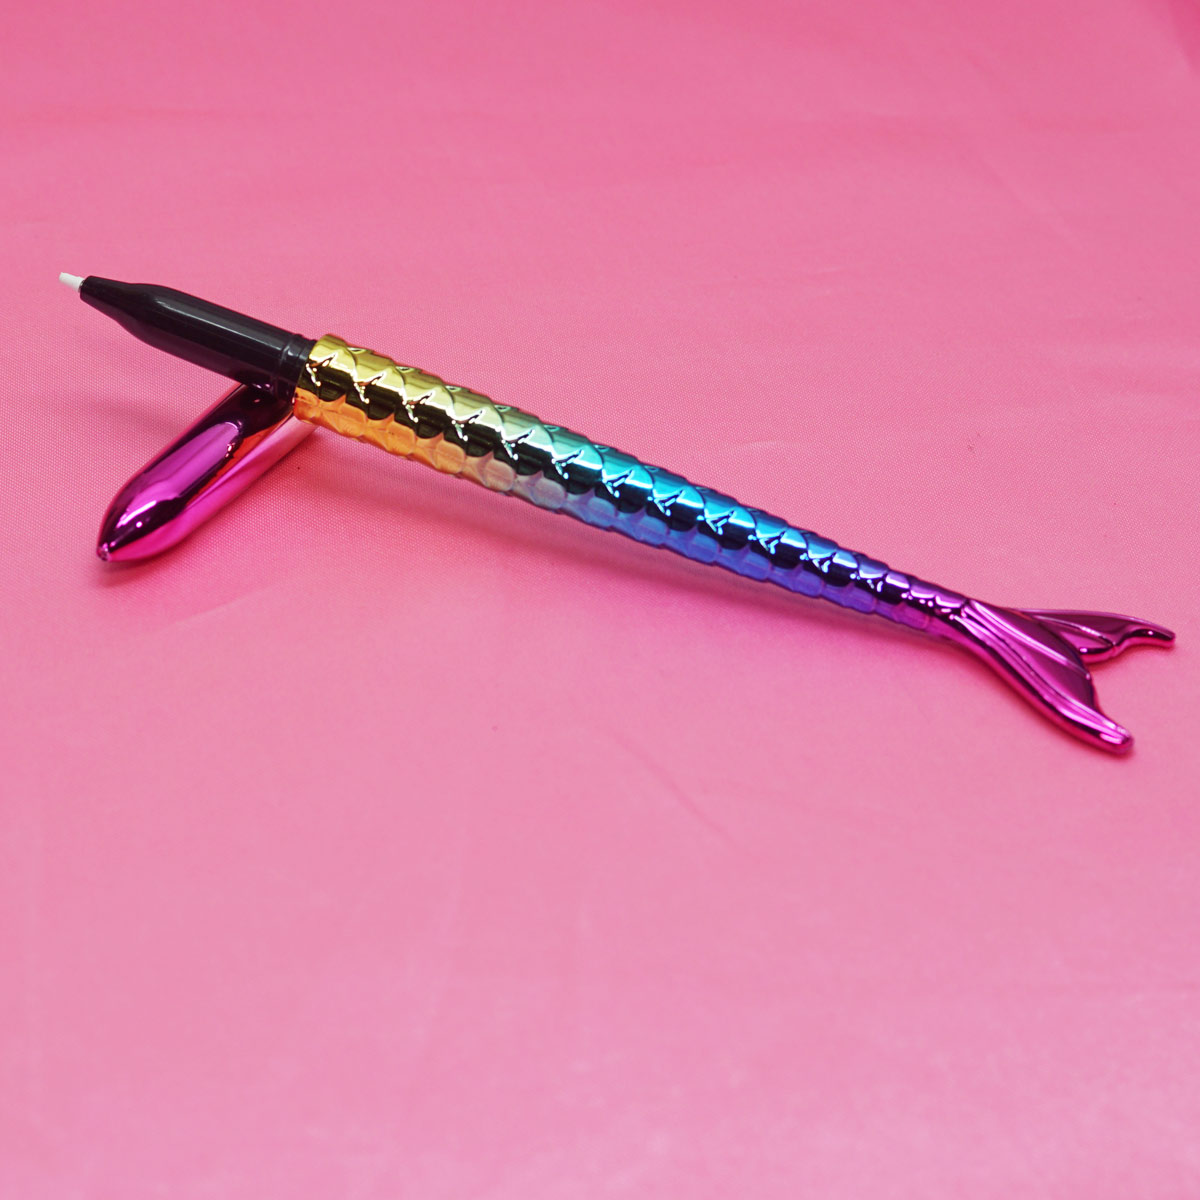 penhouse.in Mermaid Shiny Gold Blue Pink Mixed Design Body With Fine Tip Gel Pen SKU 55115